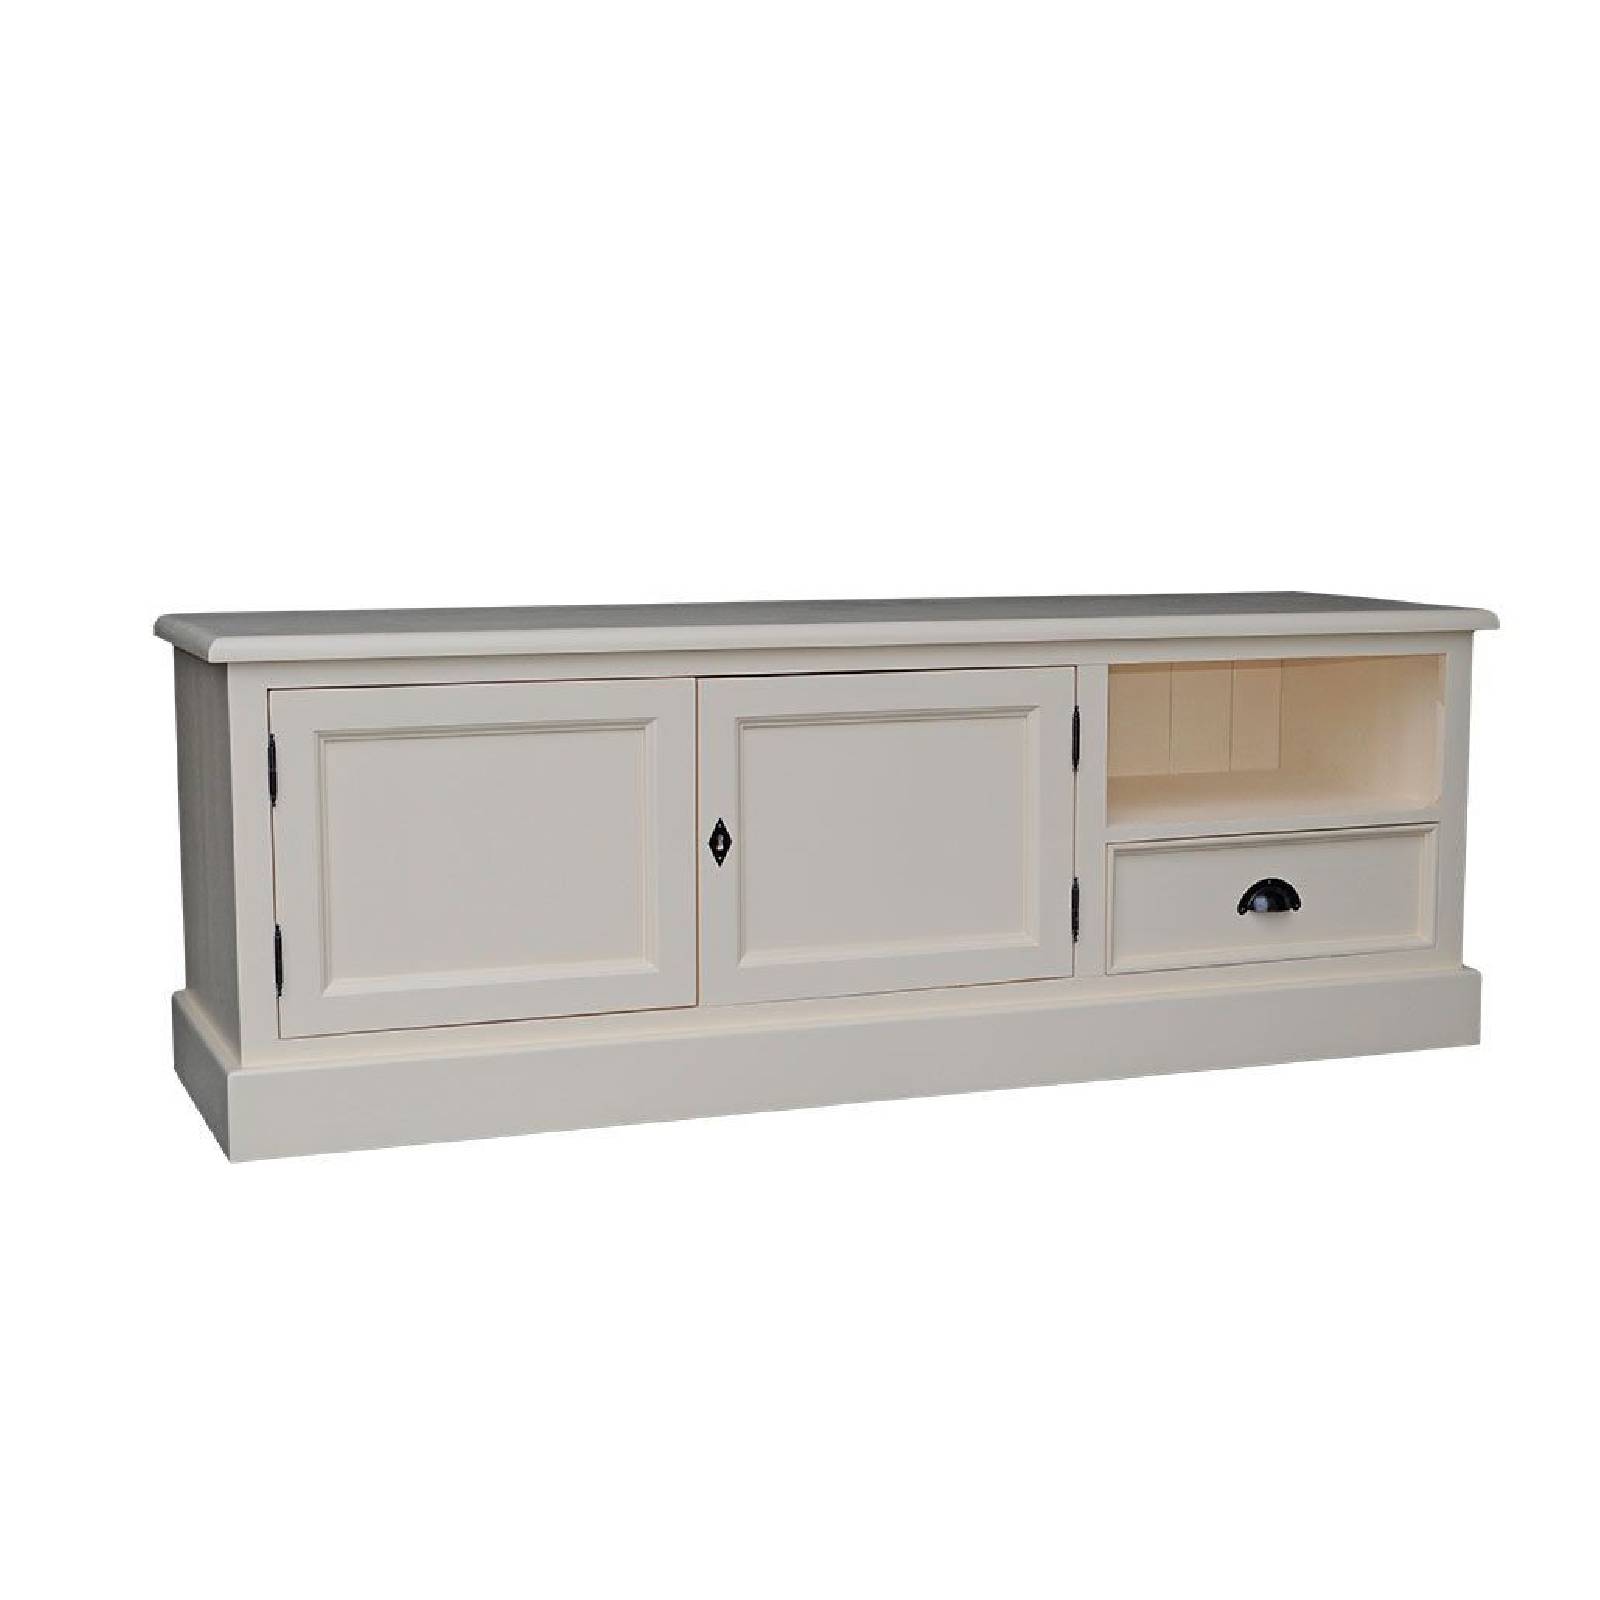 Meuble Tv classique chic Riviera en pin massif : Mobilier ambiance charme